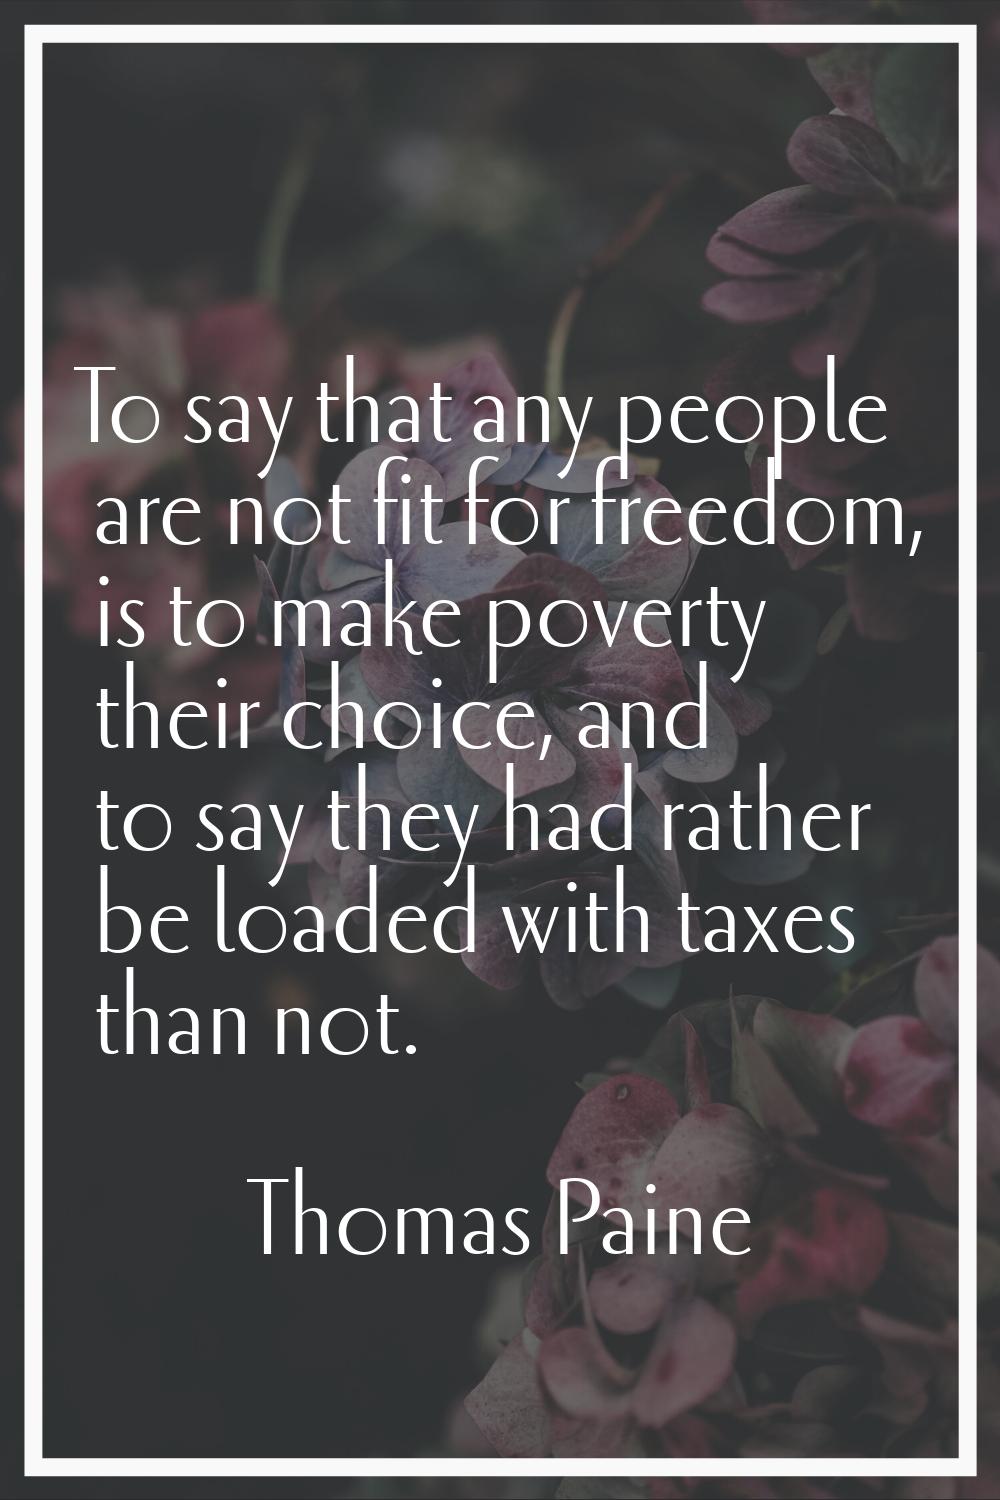 To say that any people are not fit for freedom, is to make poverty their choice, and to say they ha